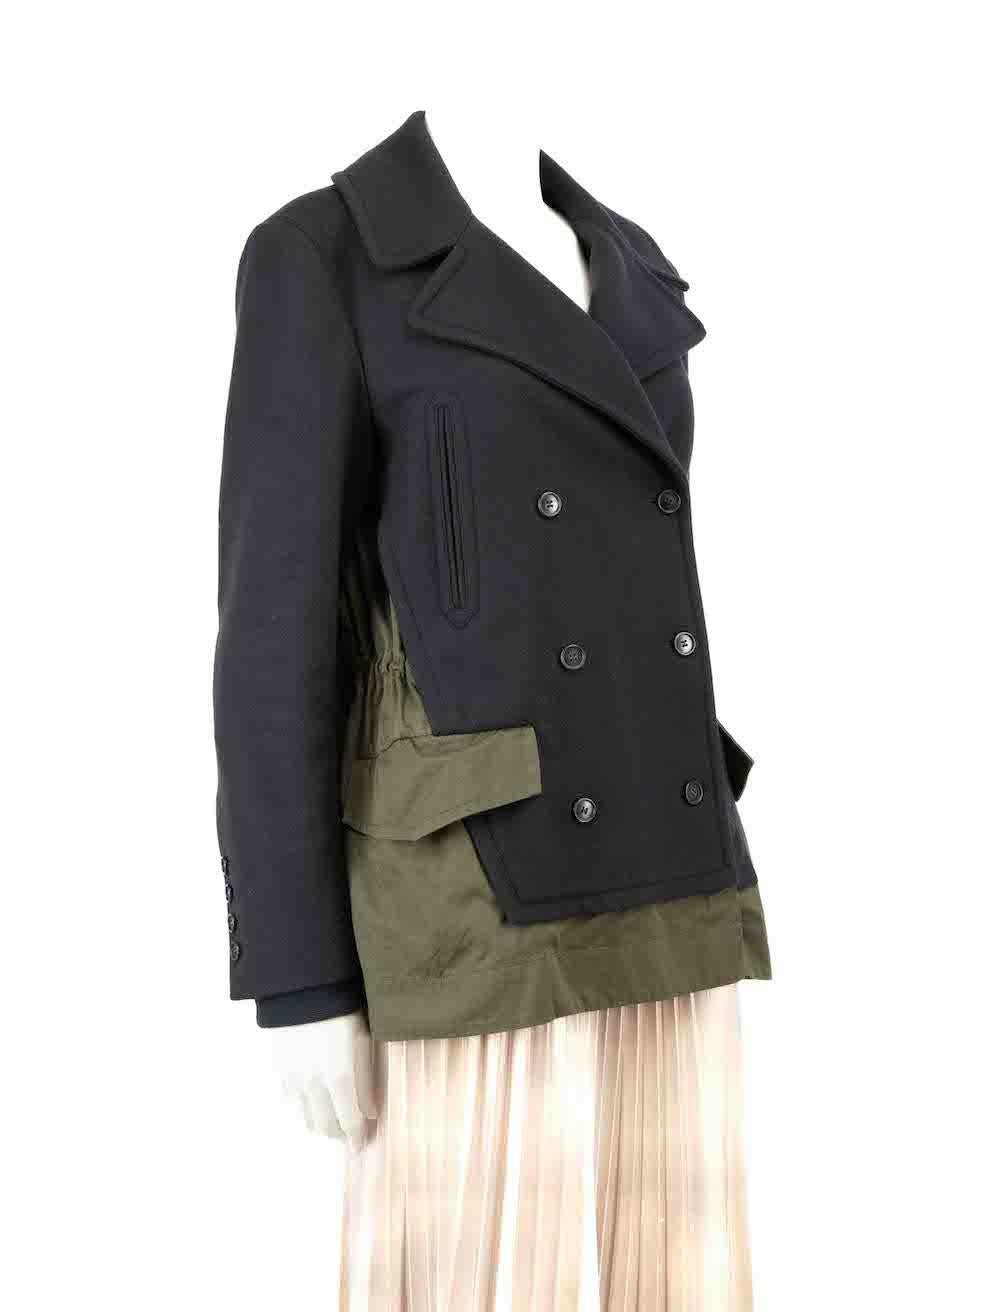 CONDITION is Very good. Hardly any visible wear to coat is evident on this used G Label by Goop designer resale item.
 
Details
Navy and khaki
Wool
Peacoat
Short length
Deconstructed accent
Double breasted
2x Front side pockets
2x Front side pockets